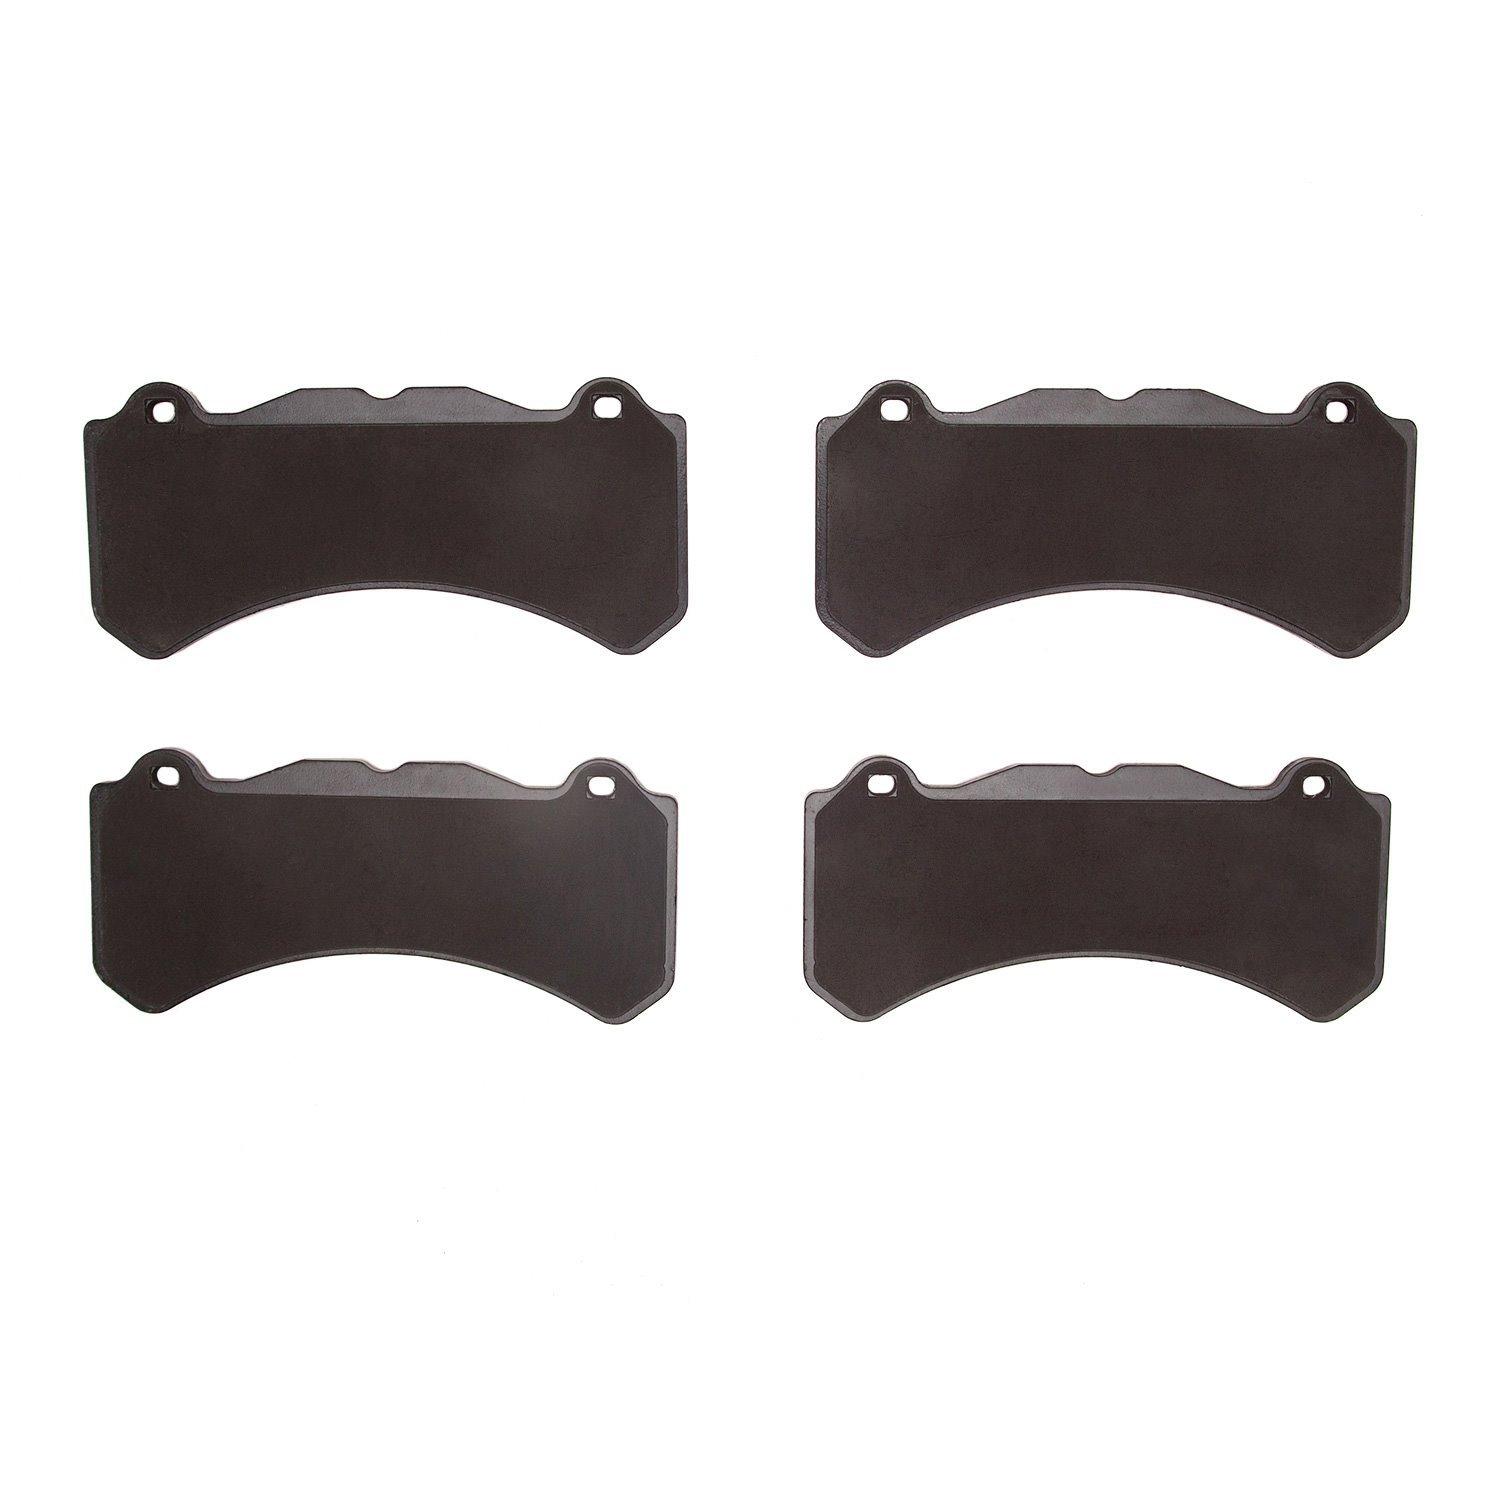 1551-2143-00 5000 Advanced Low-Metallic Brake Pads, Fits Select Volvo, Position: Front